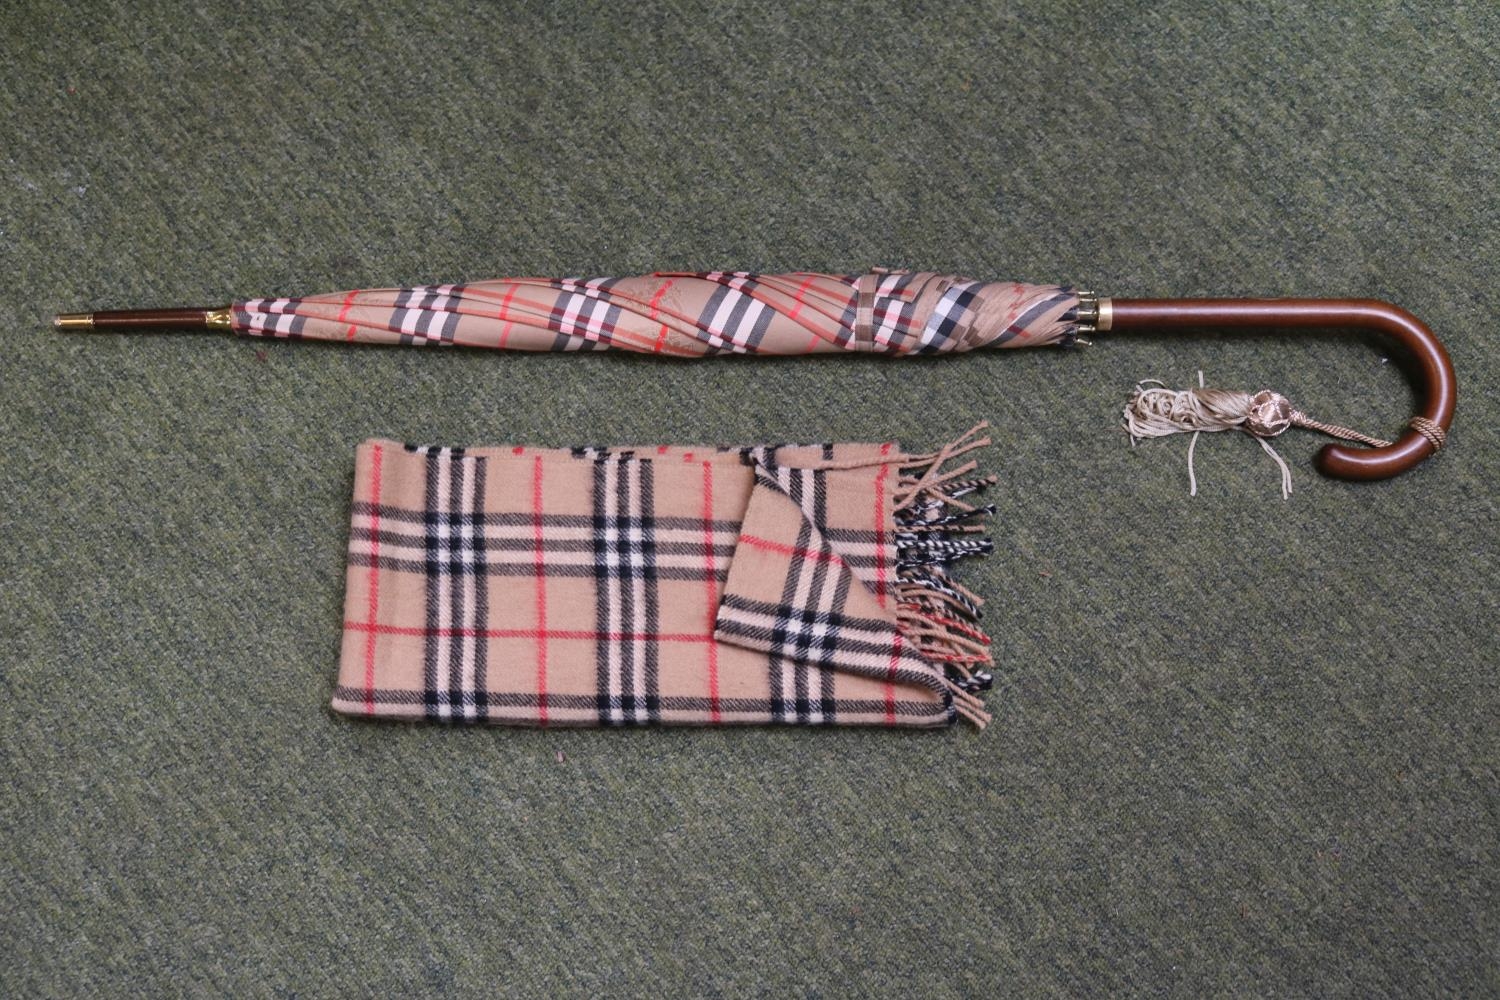 Burberry Tartan Umbrella with Gilt Ferrule and Silk tassel with a matched Burberry Tartan Scarf - Image 2 of 4